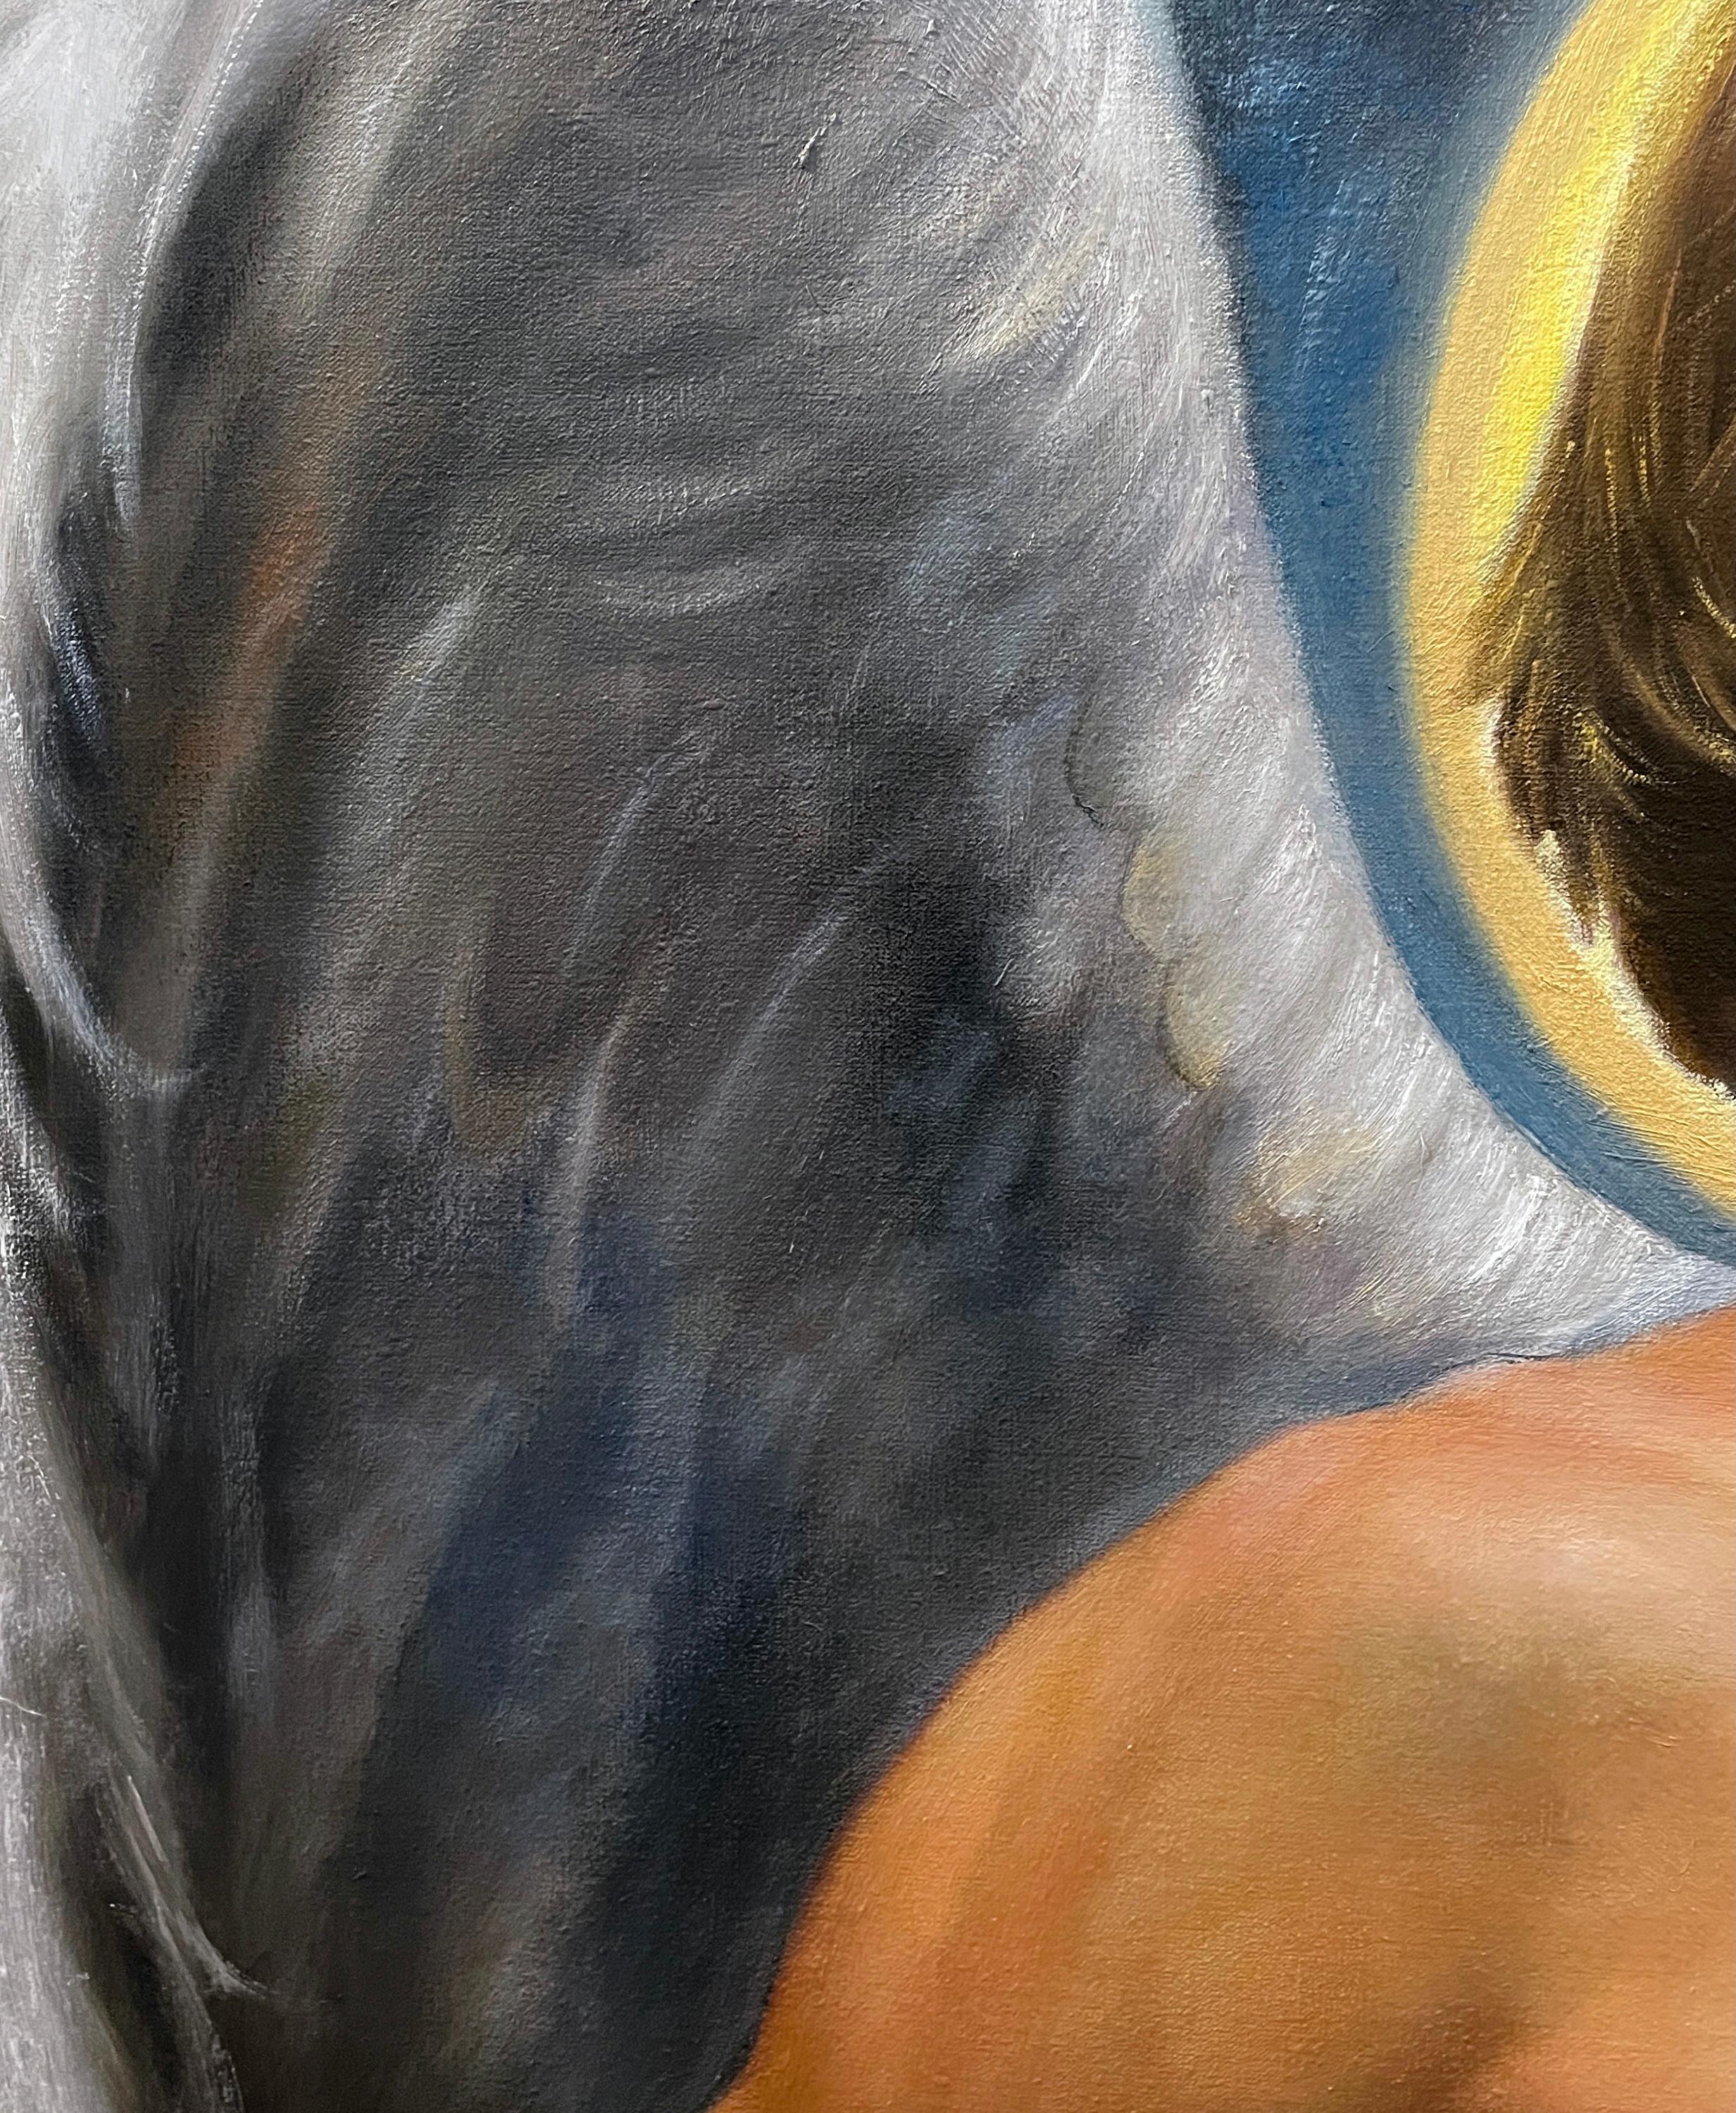 Fallen Angel - Blond, Bare Chested Winged Male, Contemporary Oil Painting  For Sale 1